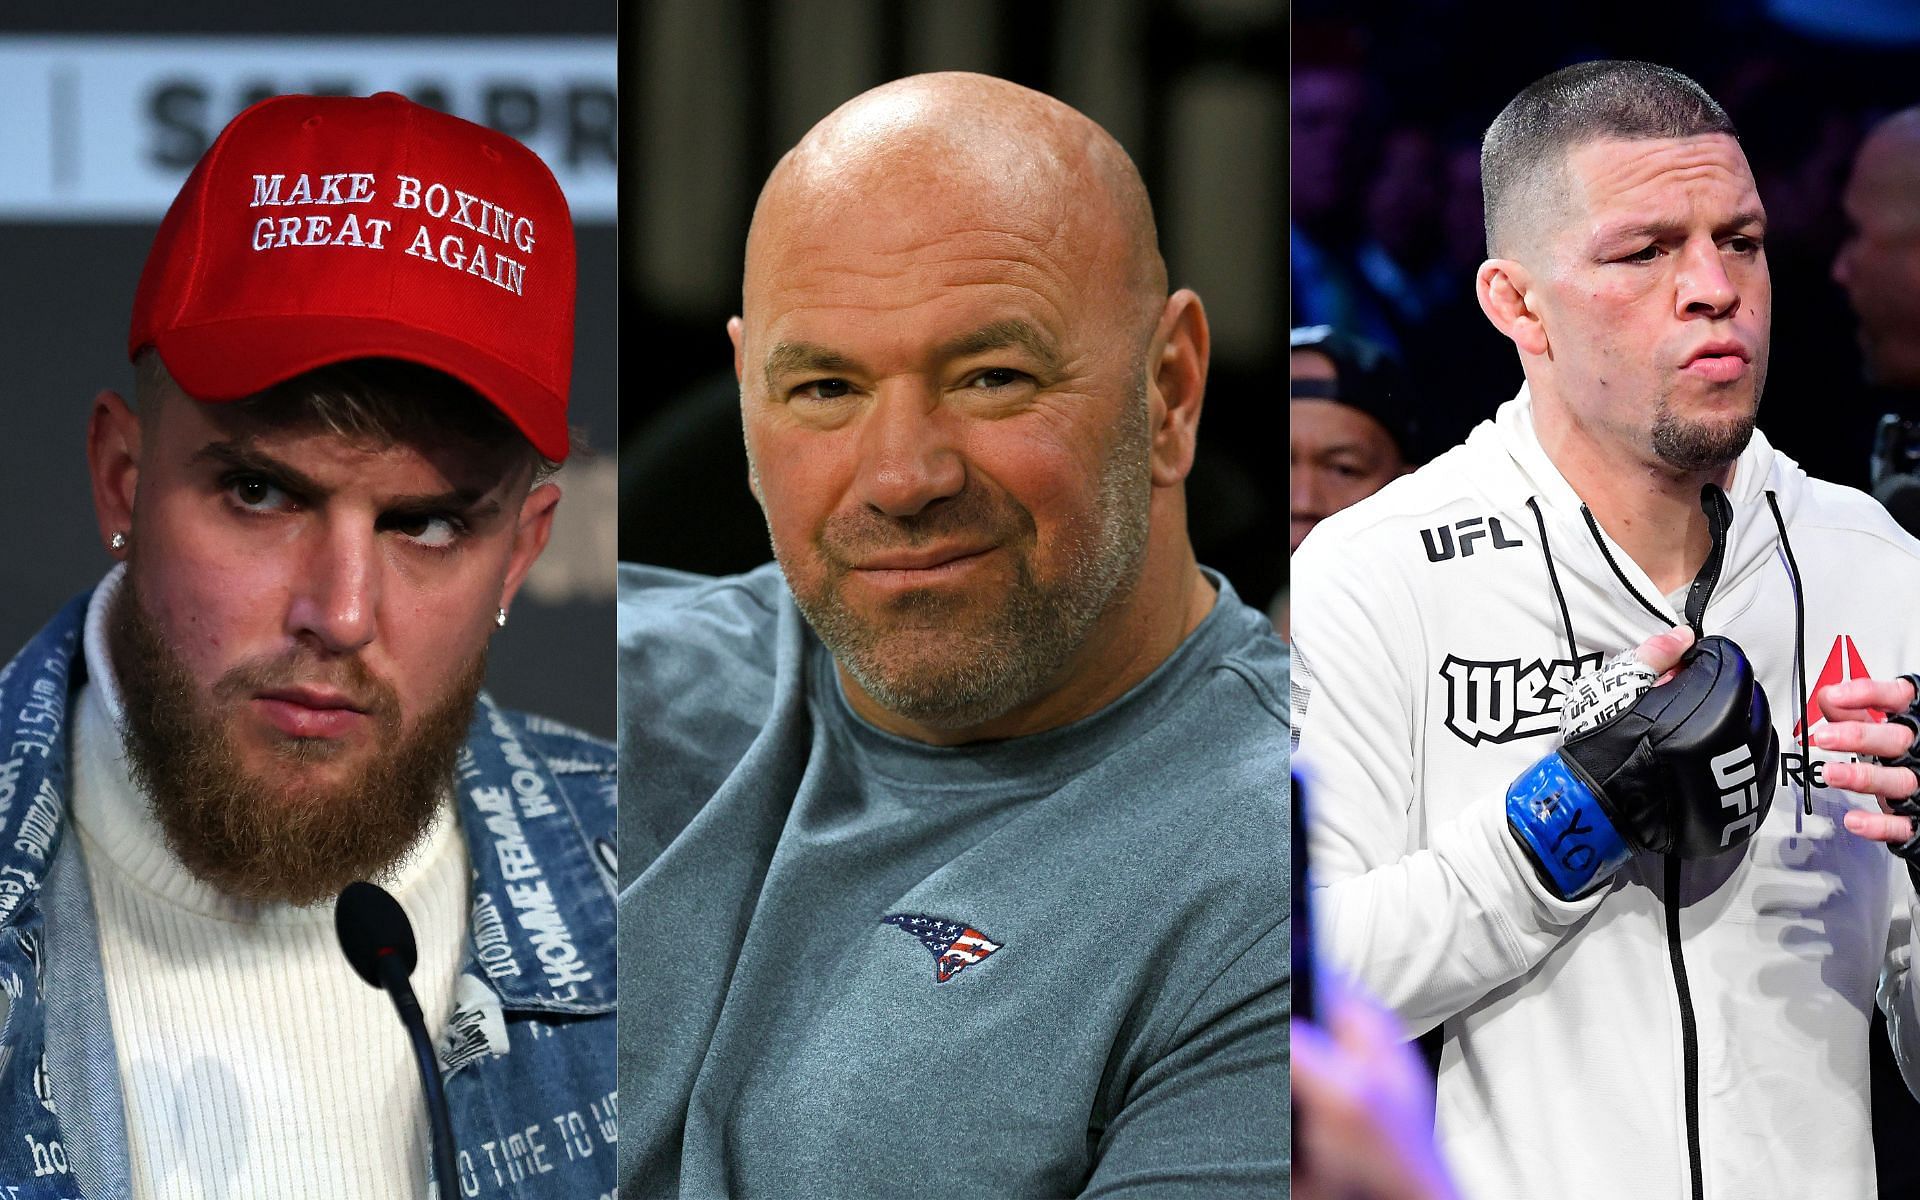 Jake Paul (left), Dana White (center), and Nate Diaz (right) (Image credits Getty)